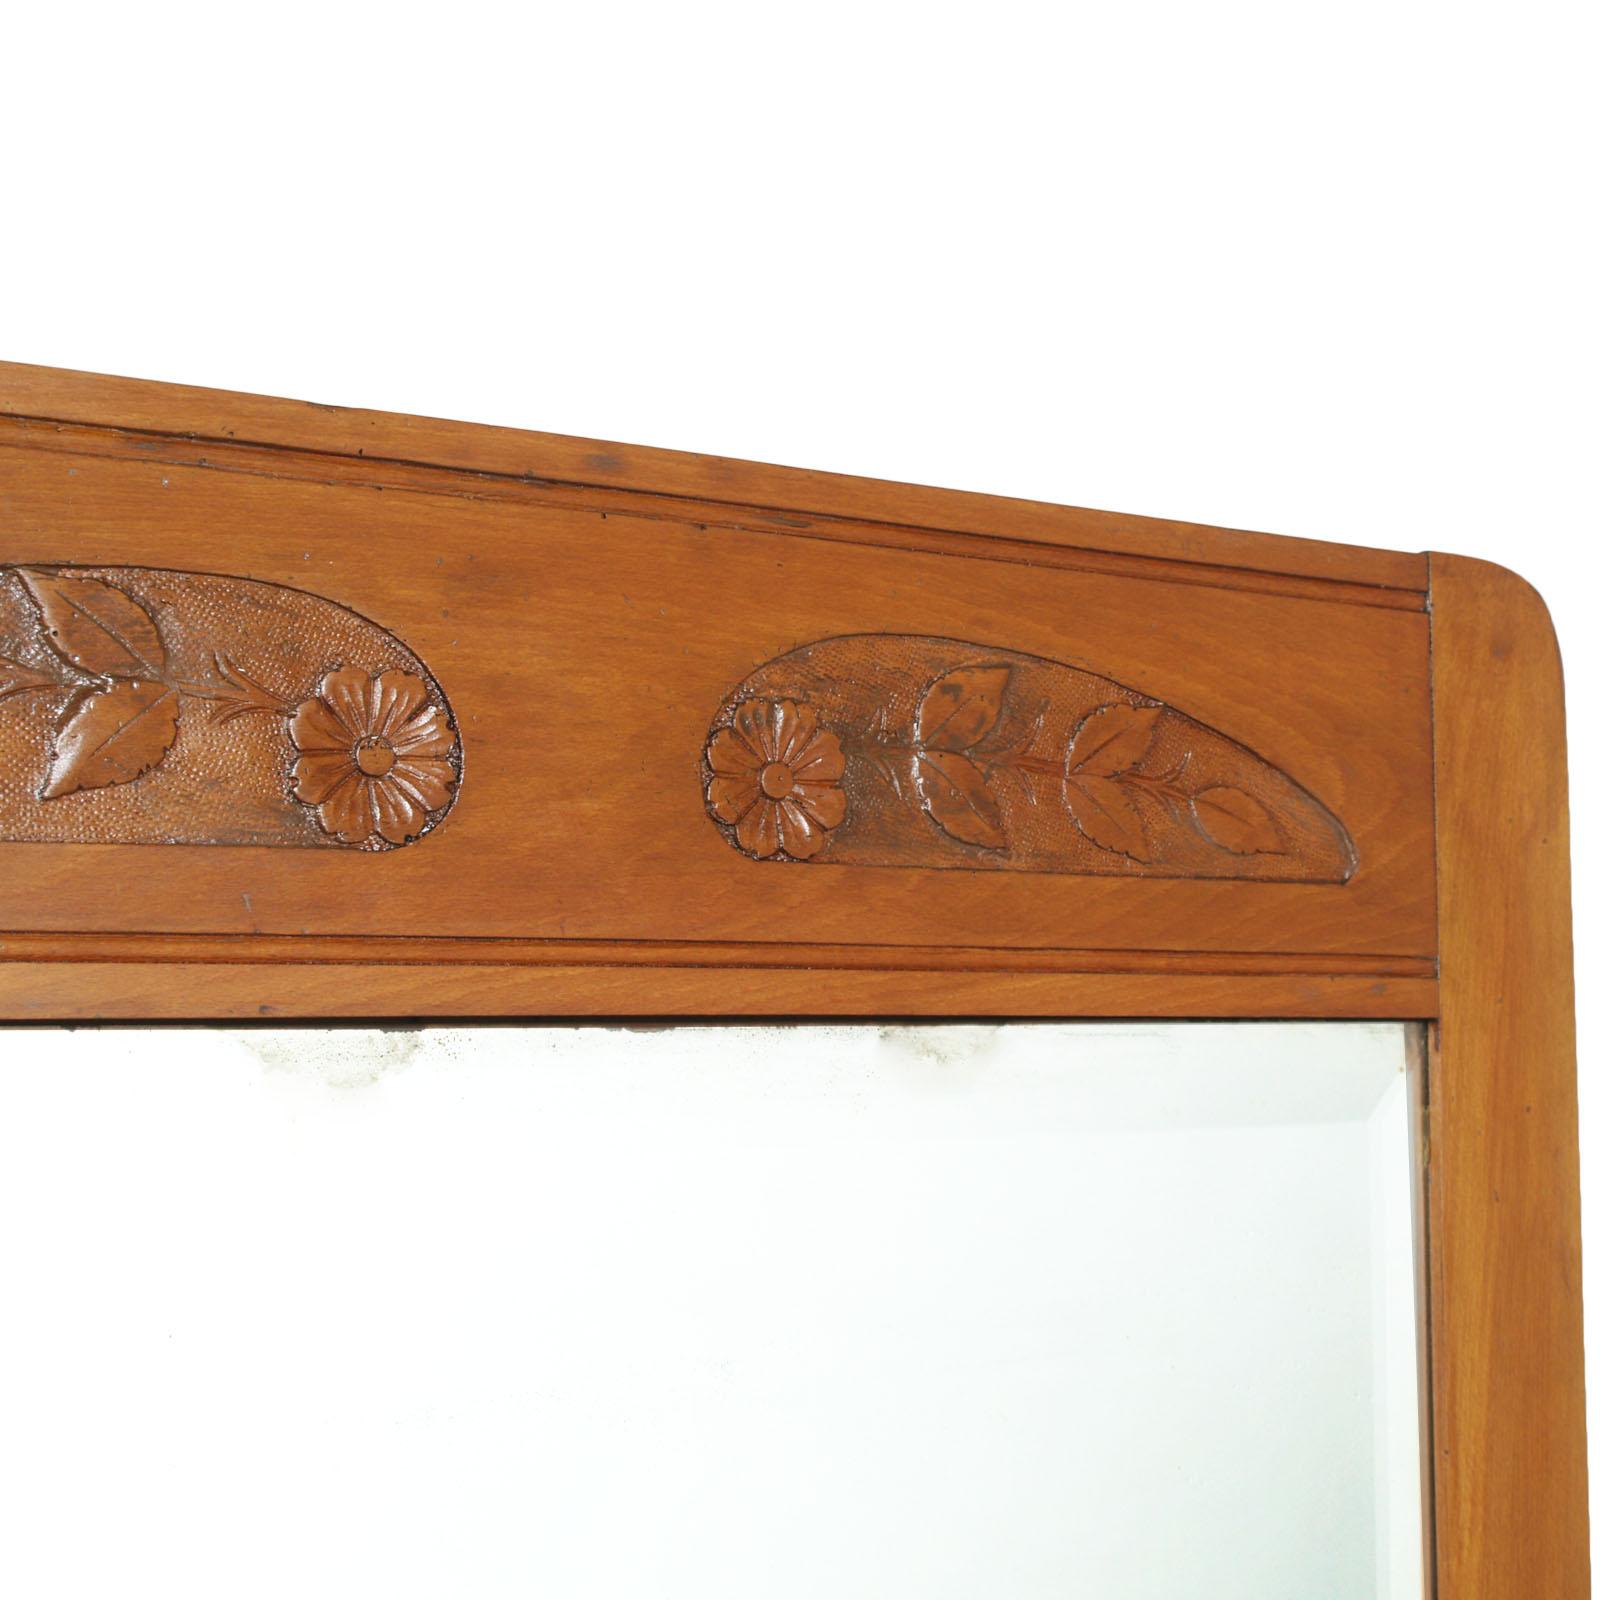 20th Century Art Nouveau Vanity Cabinet, Carved Cherrywood, Bevelled Mirror, Gray Marble Top For Sale